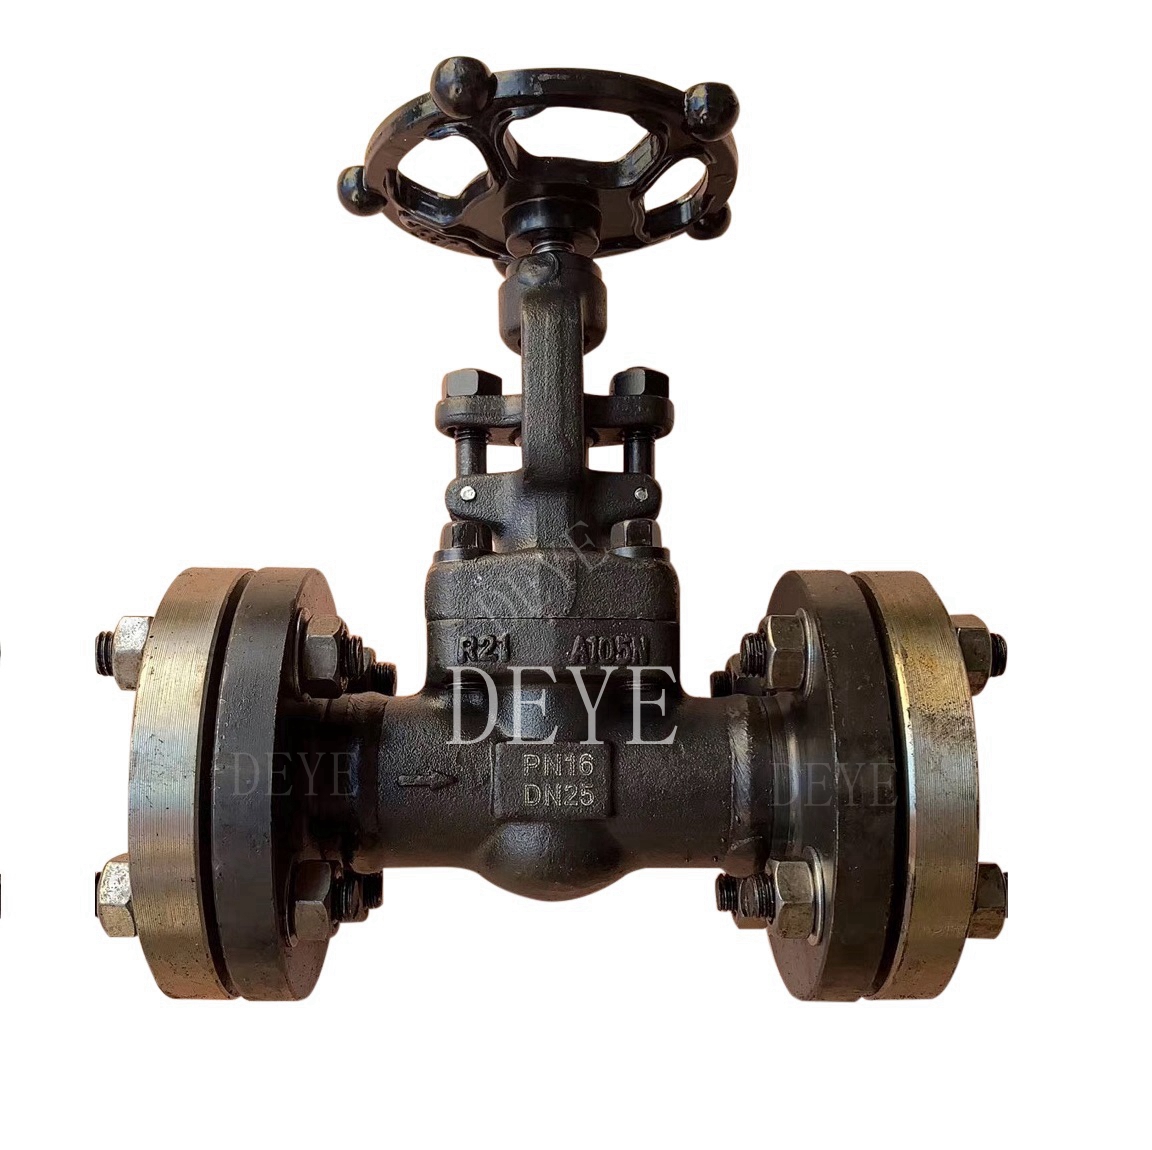 Factory wholesale Lug Check Valve -
 A105 Forged steel Gate Valve with counter flanges GVC-0016-1F – Deye